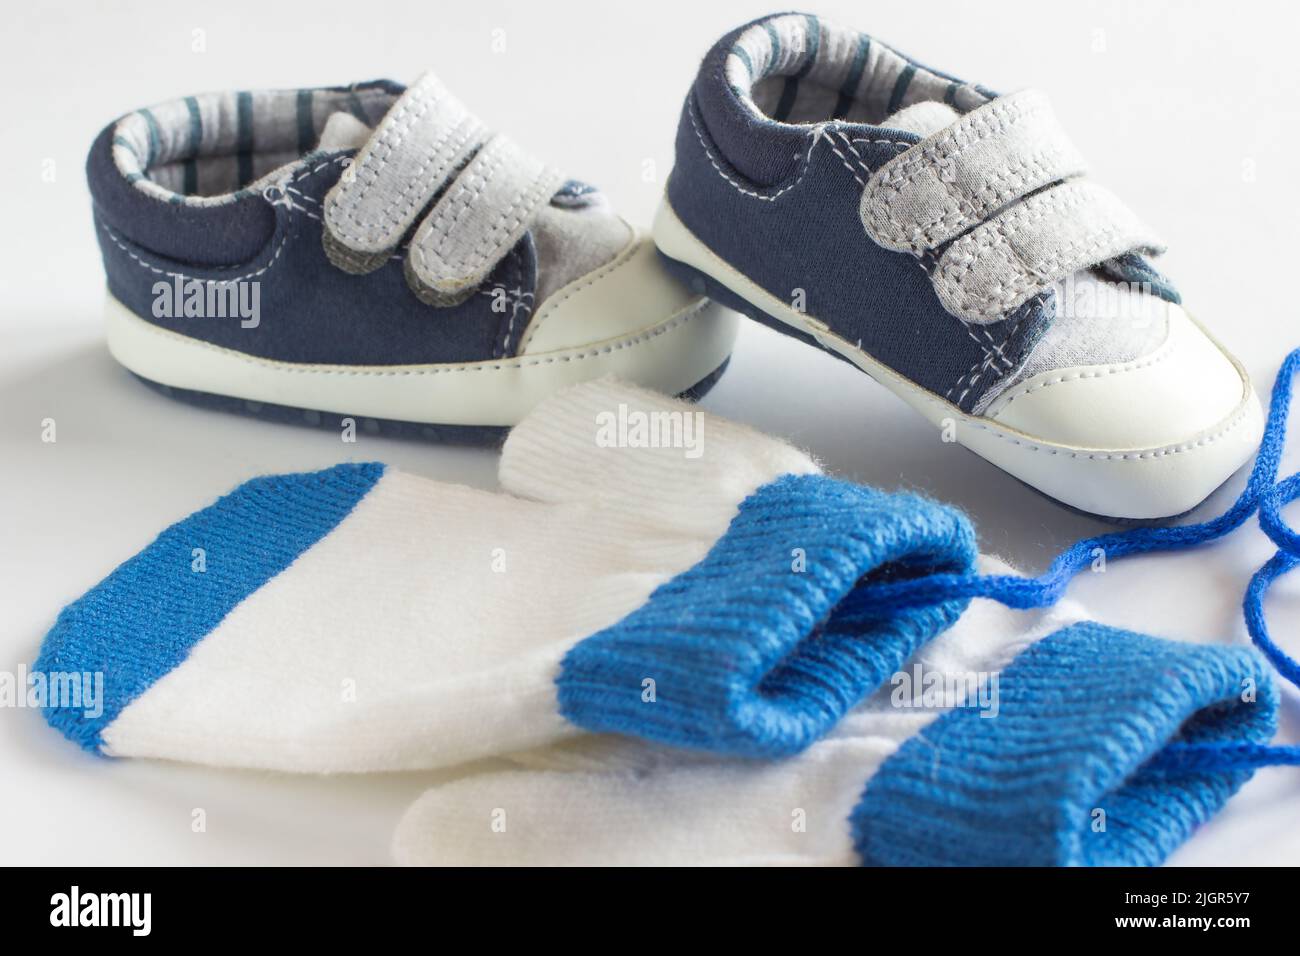 Children's shoes and mittens on a white background Stock Photo